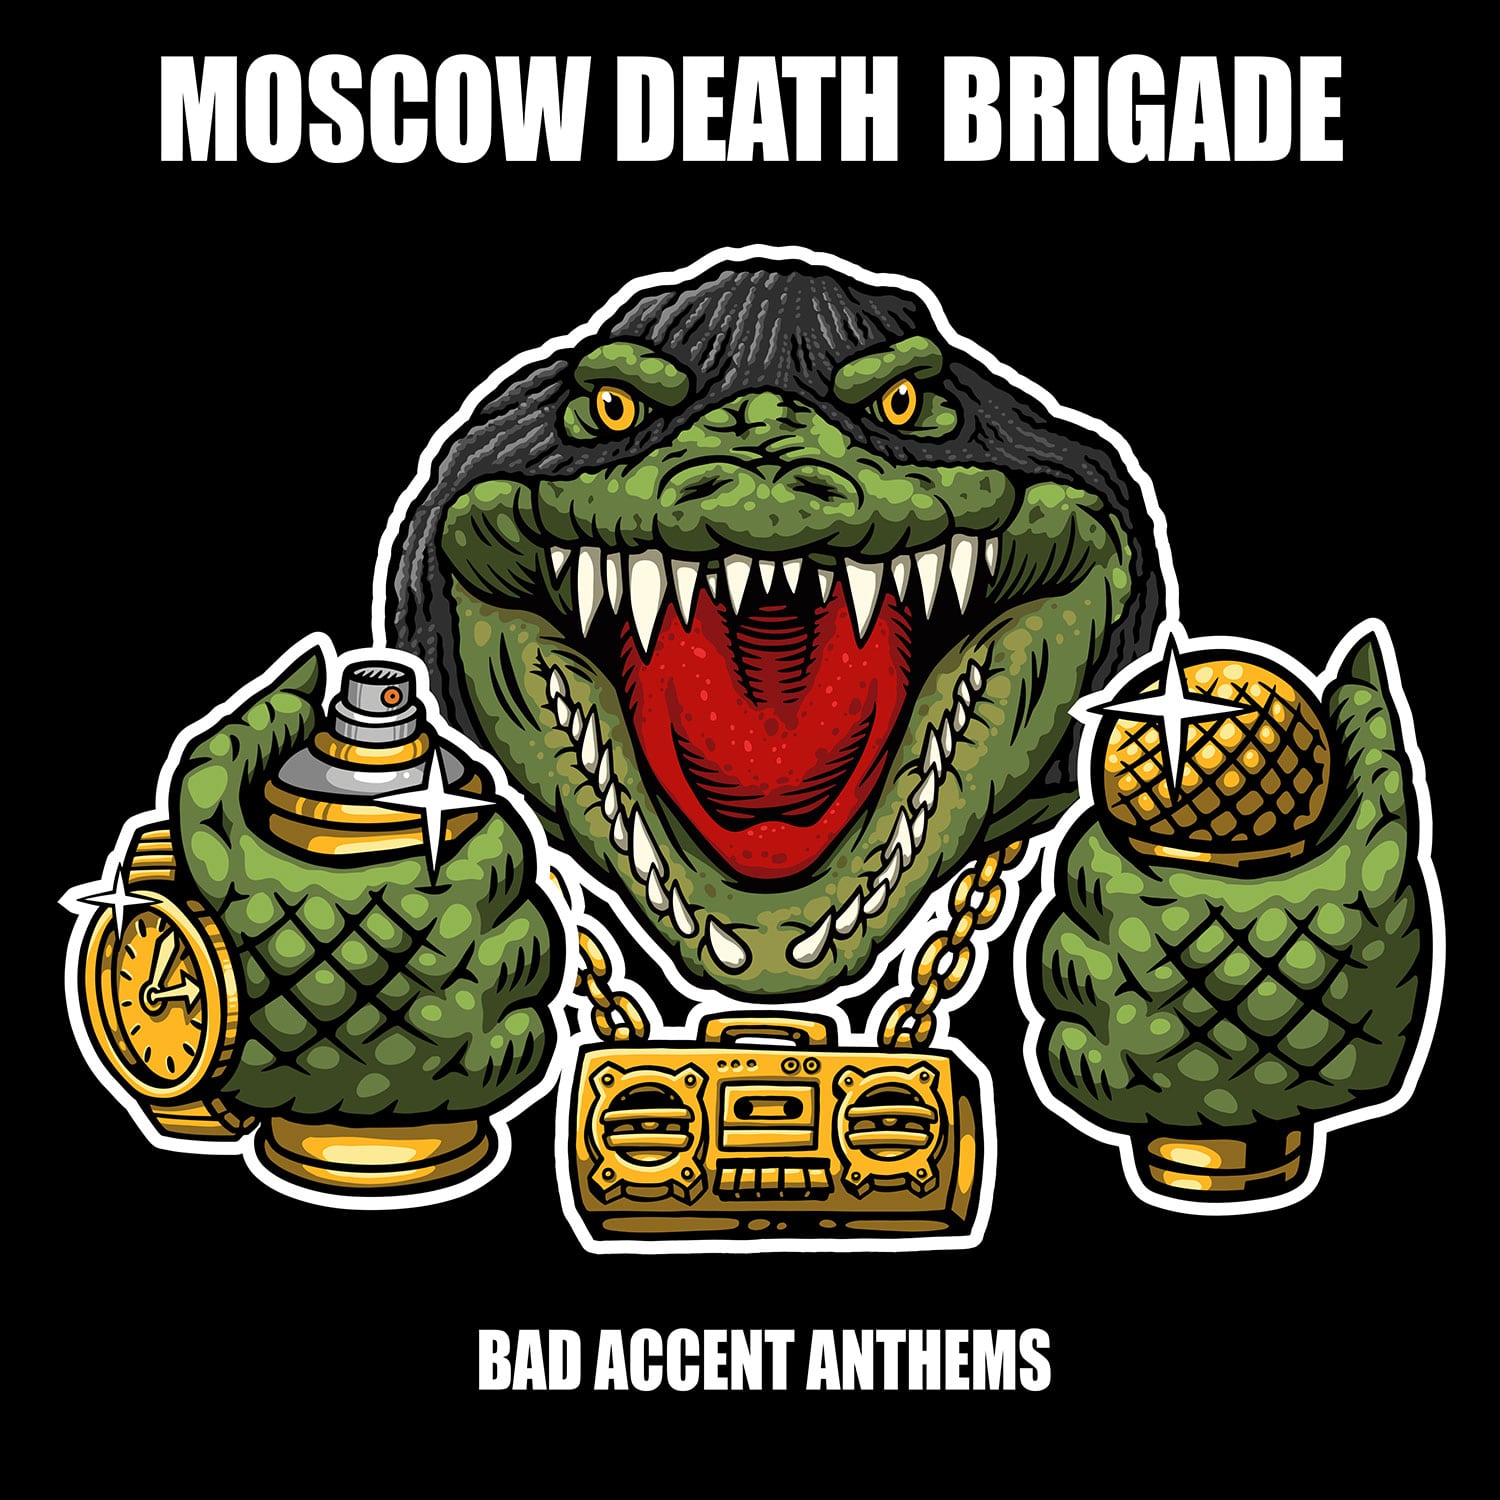 MOSCOW DEATH BRIGADE "Bad accent anthems" - CD